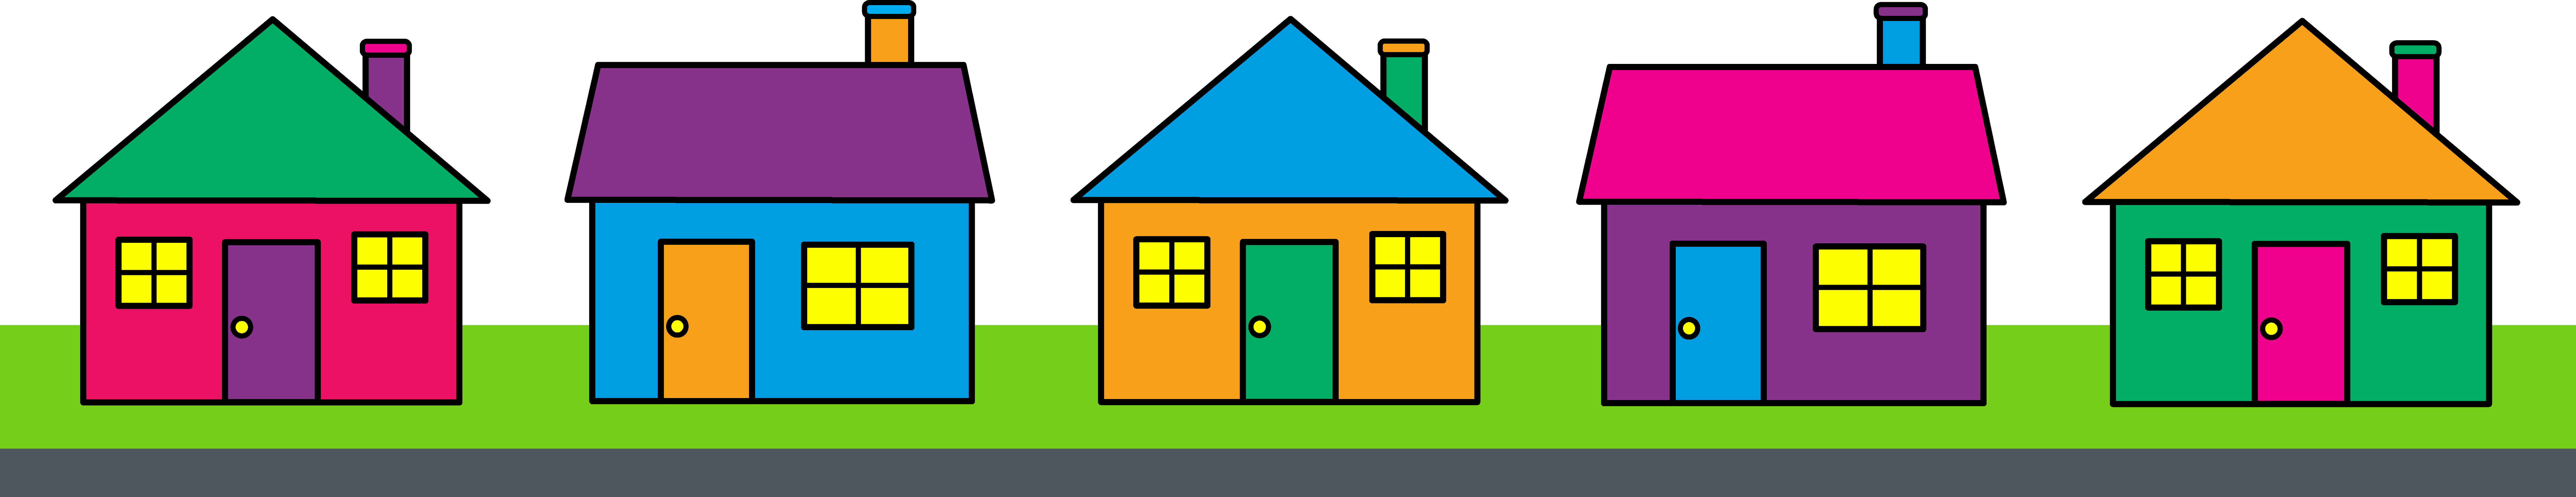 mobile home clipart free - photo #37